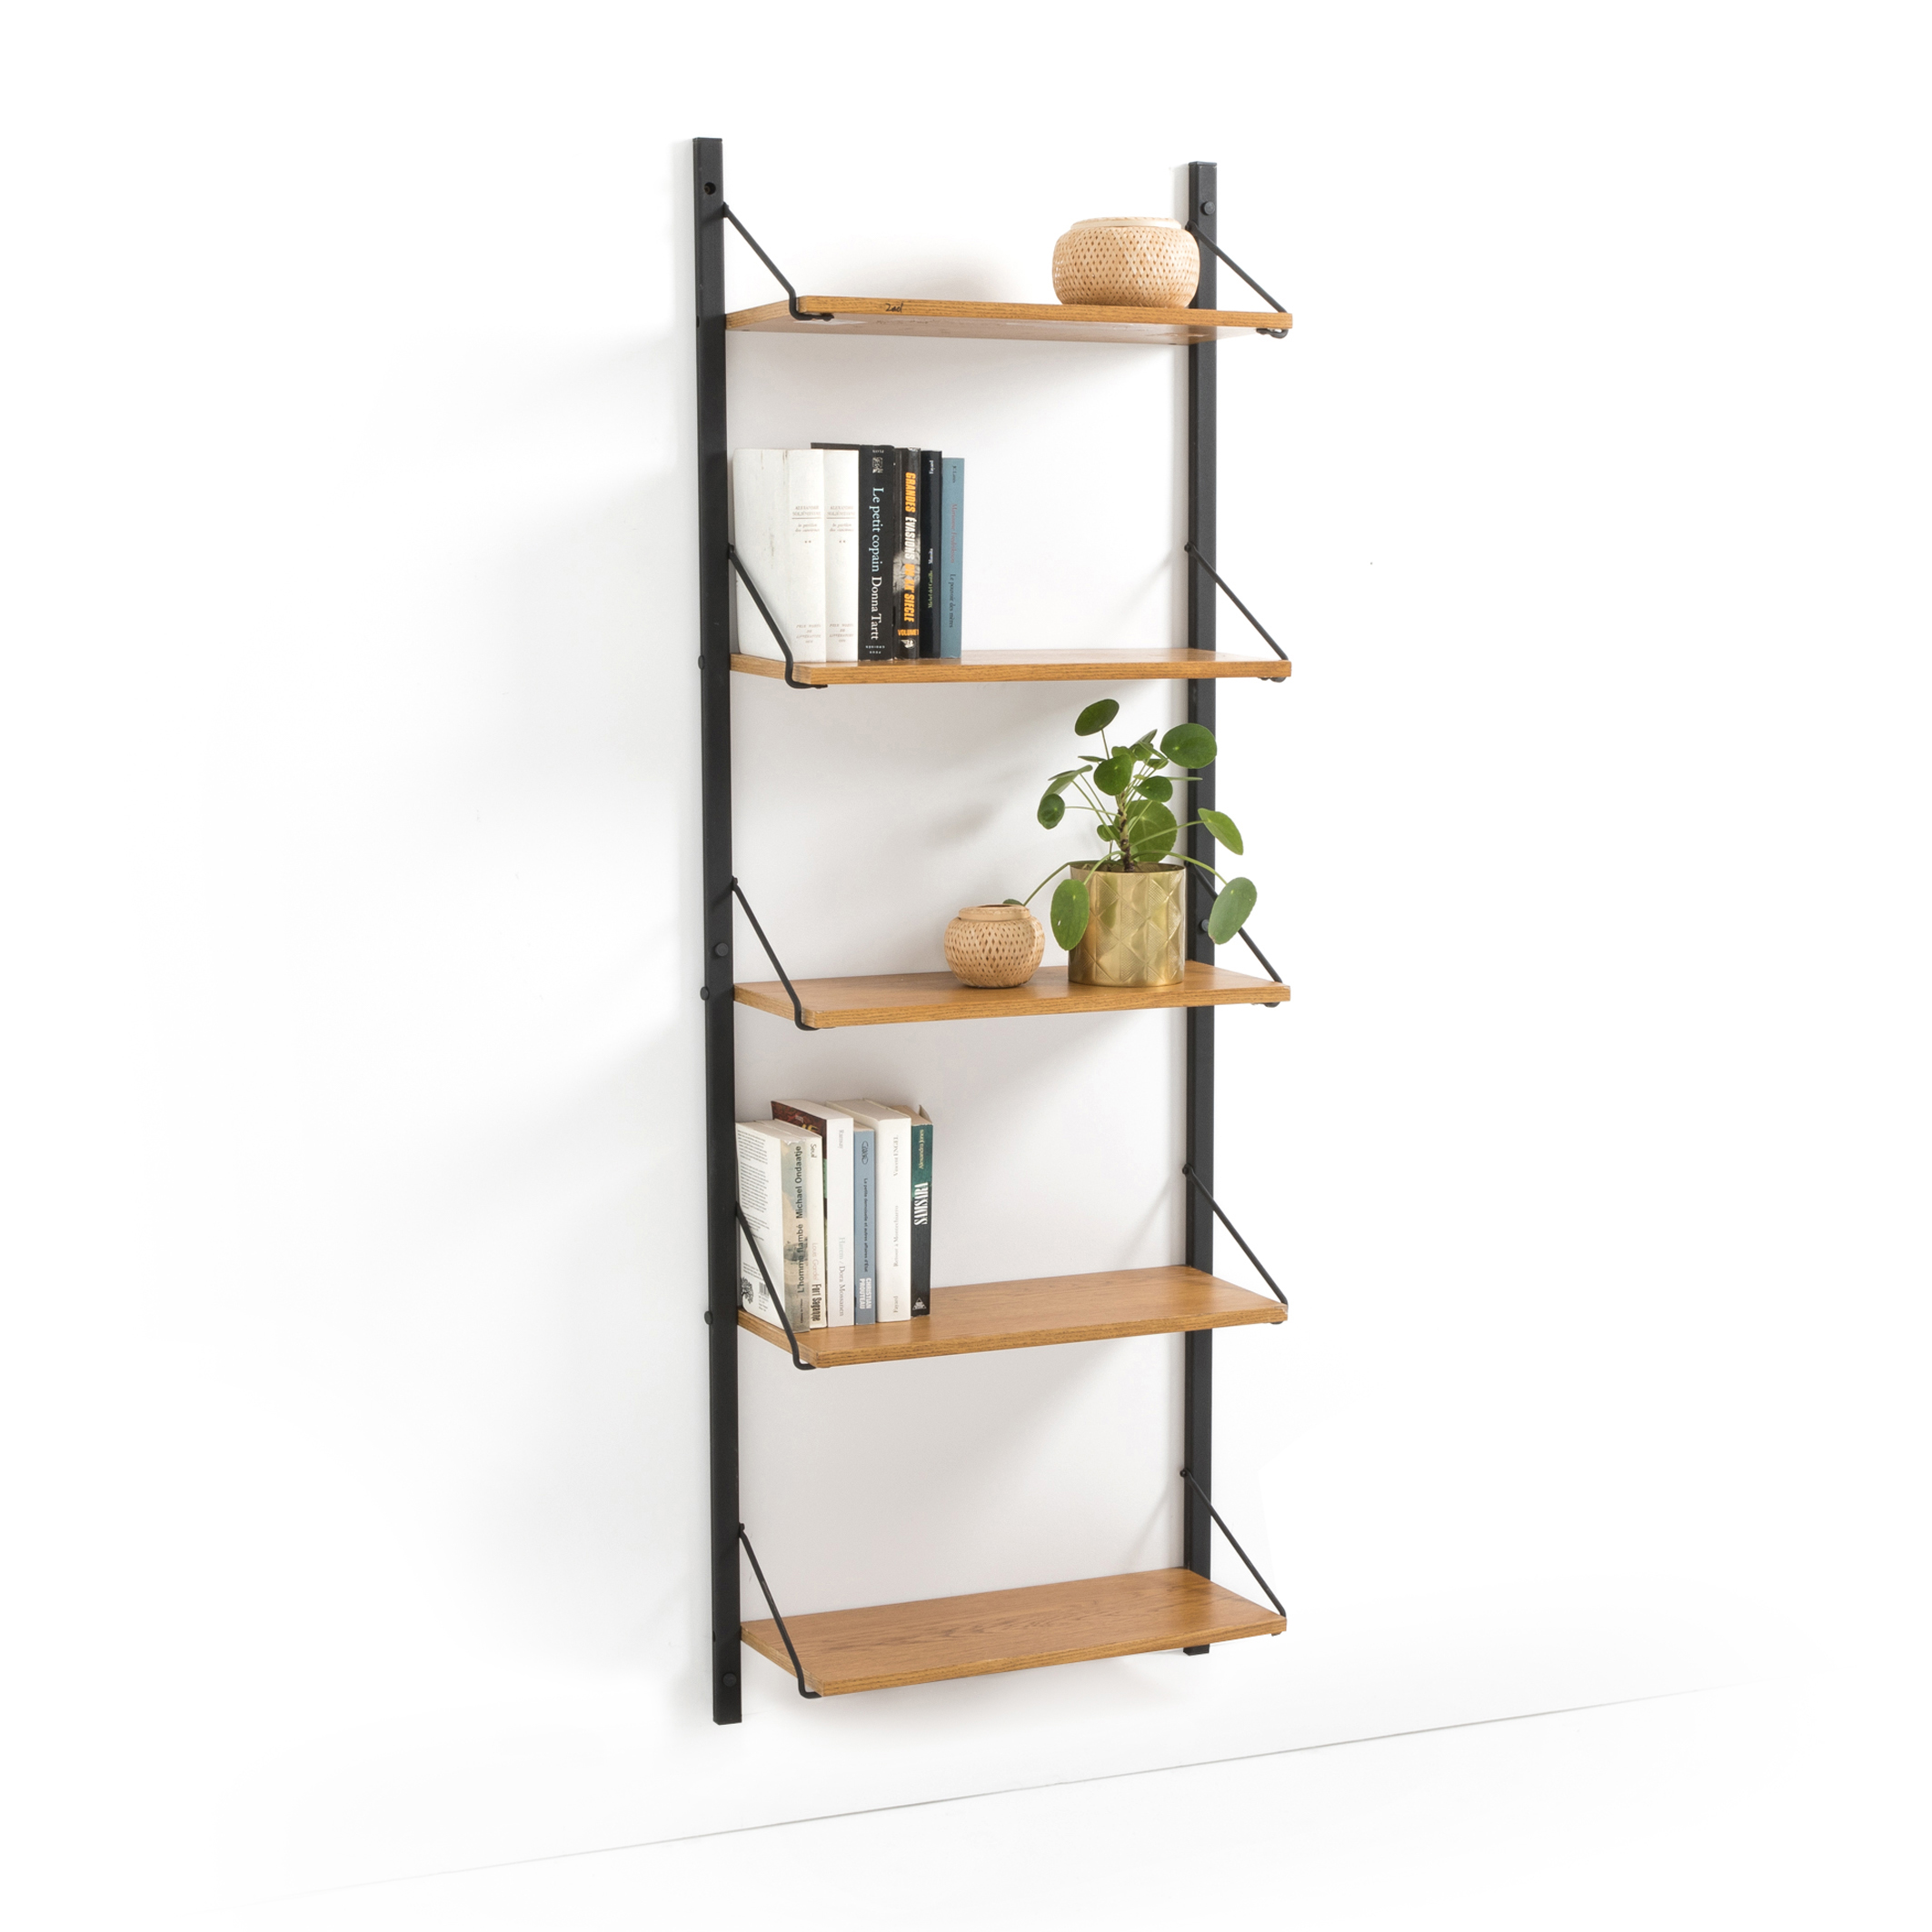 Quilda Wall Mounted Vintage Bookcase, Wall Mounted Bookcase Shelf